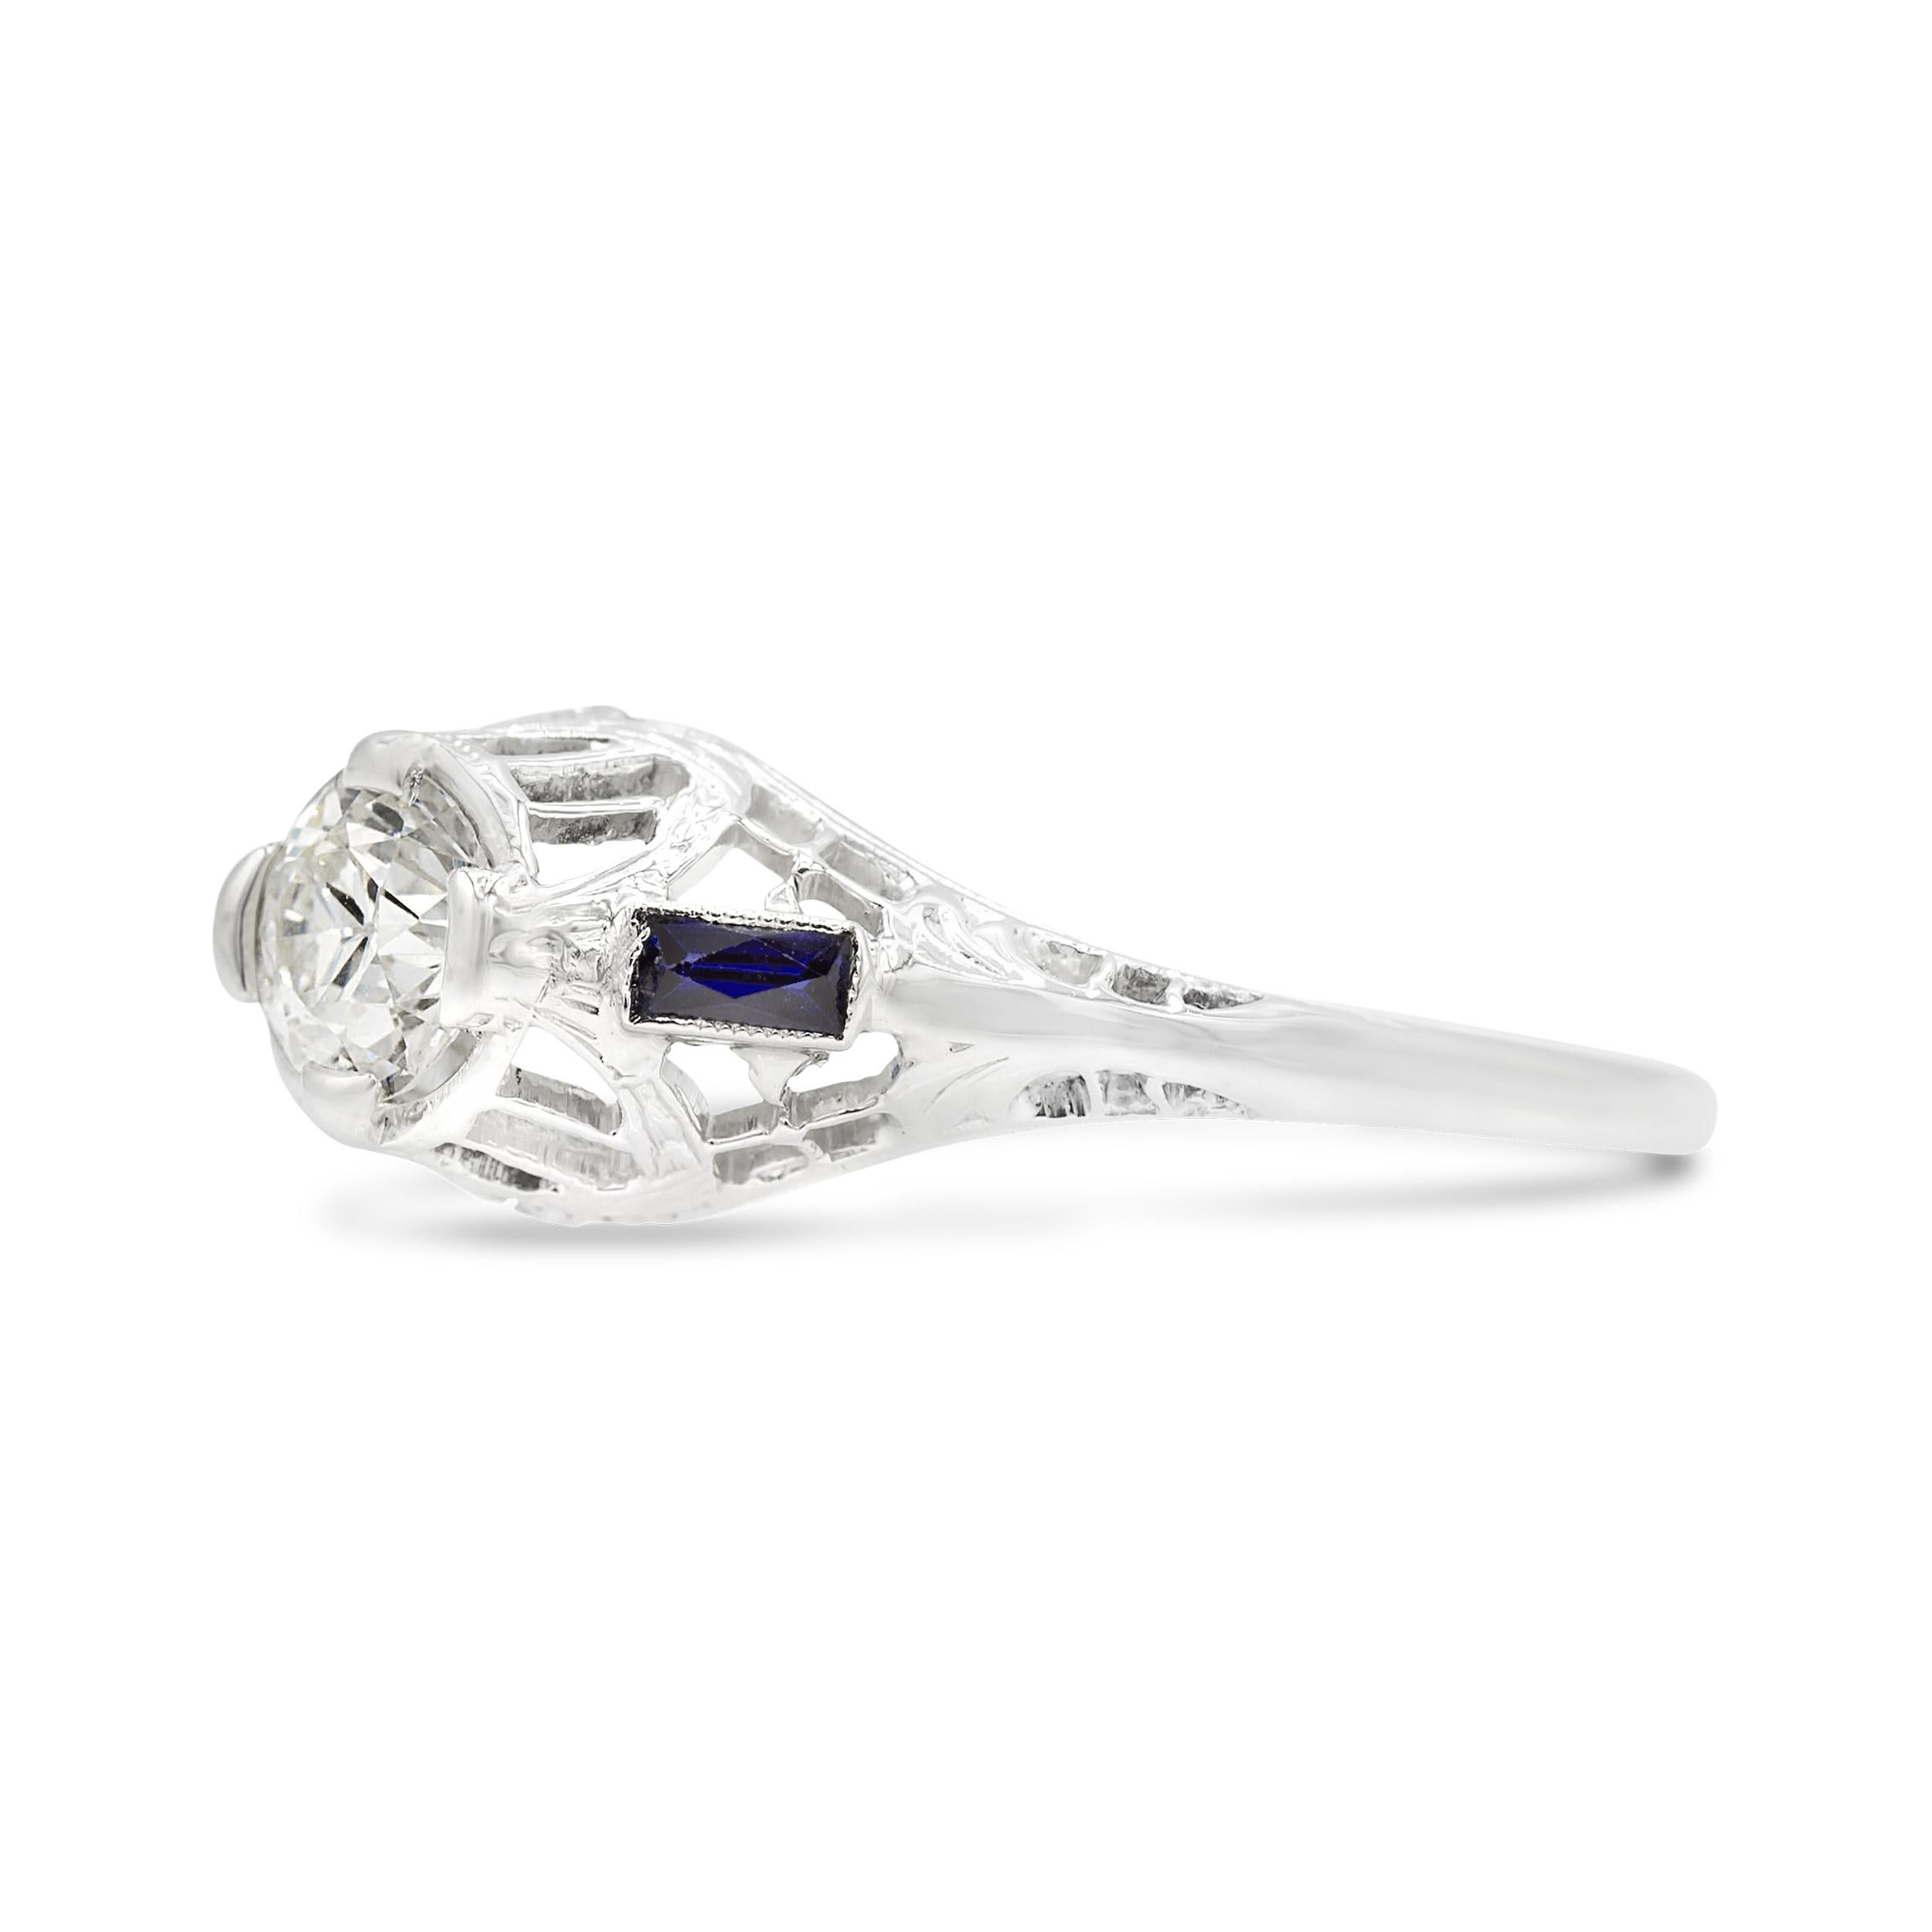 This charming Art Deco engagement ring is your vintage partner in time. The center bezel-set 0.50 ct. old European diamond flashes with chunky facets and a small table, and is flanked by 2 long, calibre sapphire baguettes. Fashioned in white gold,